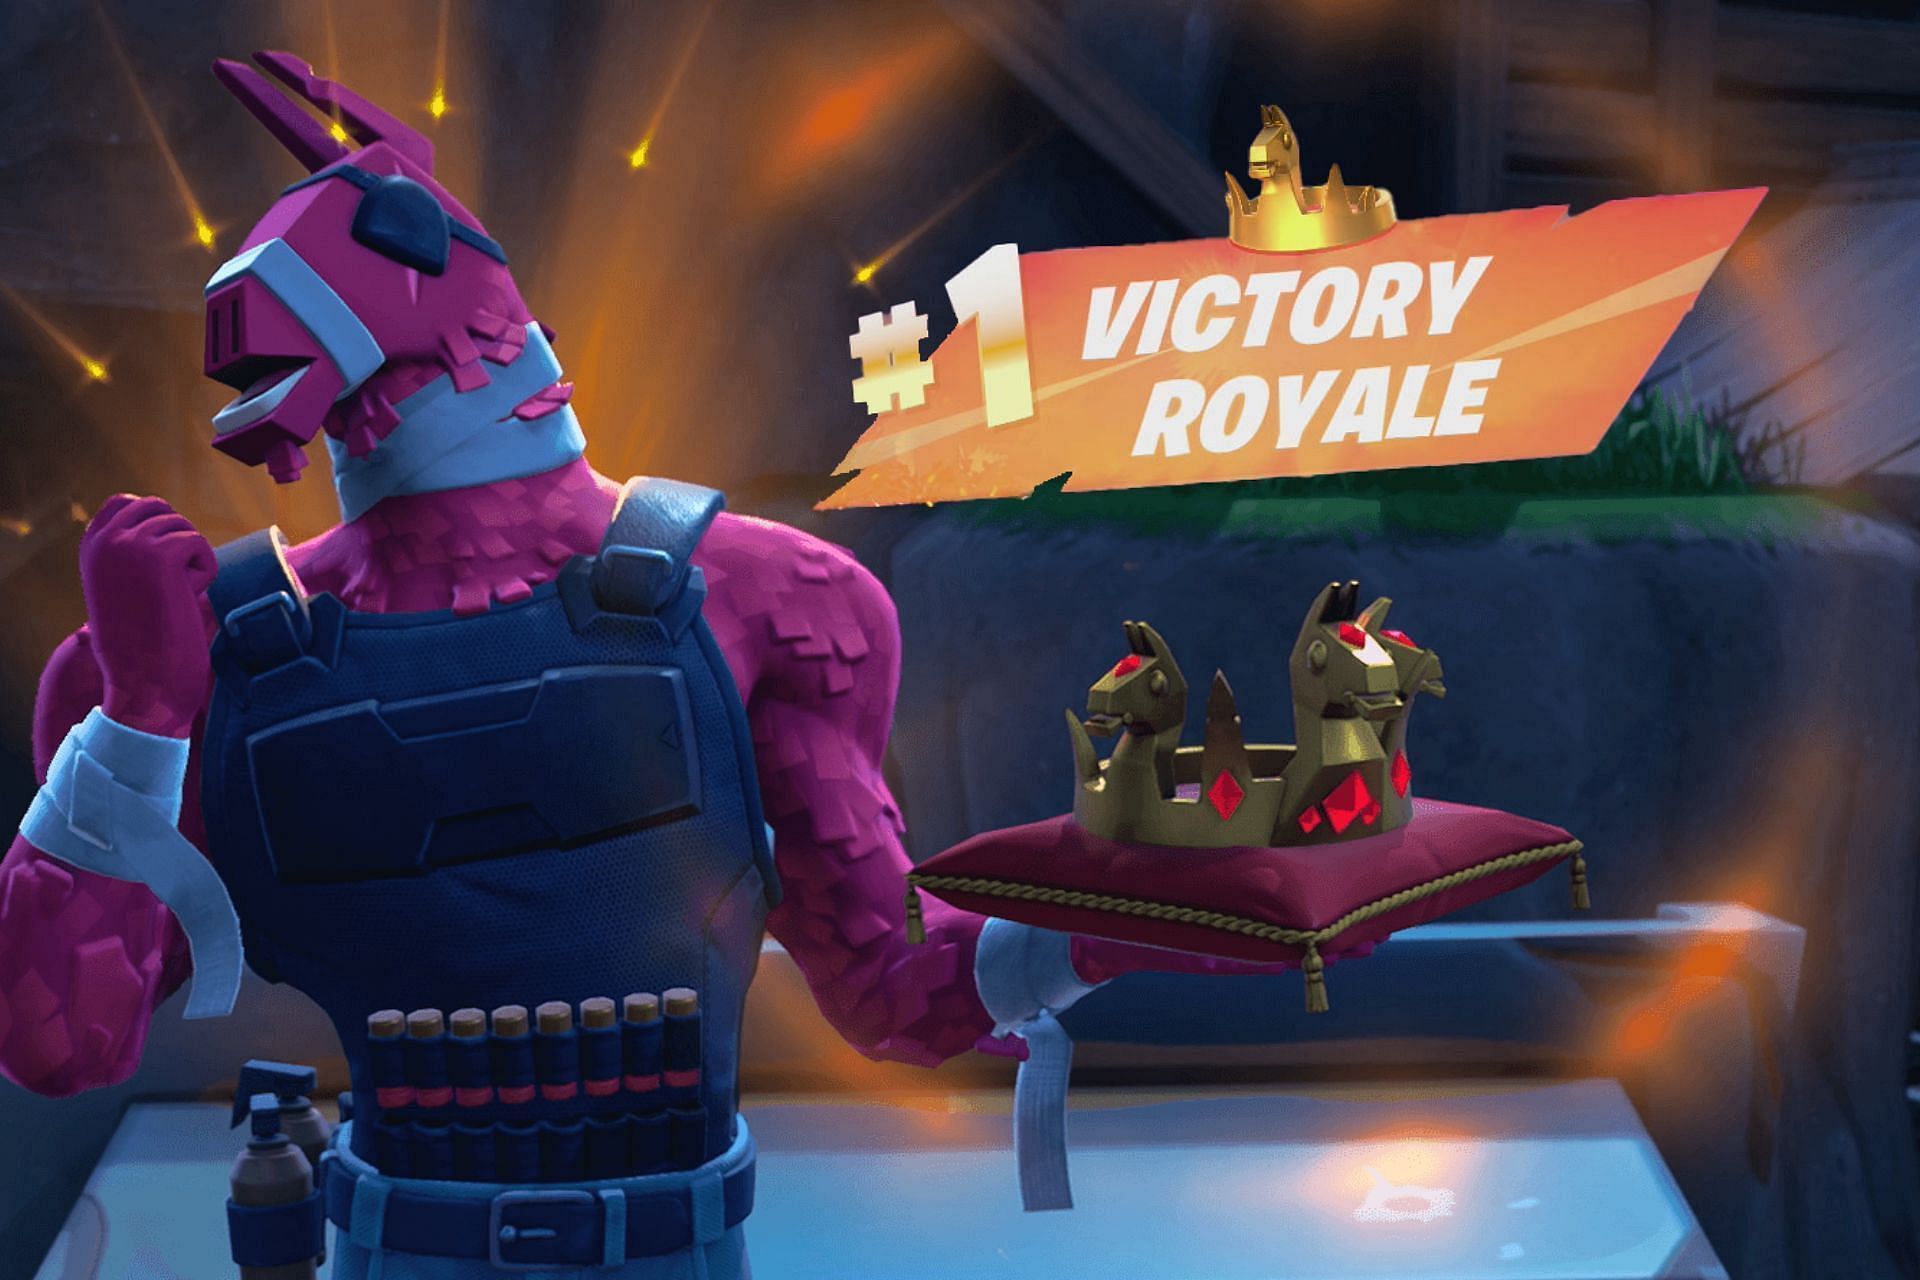 who has the most wins in solo royale